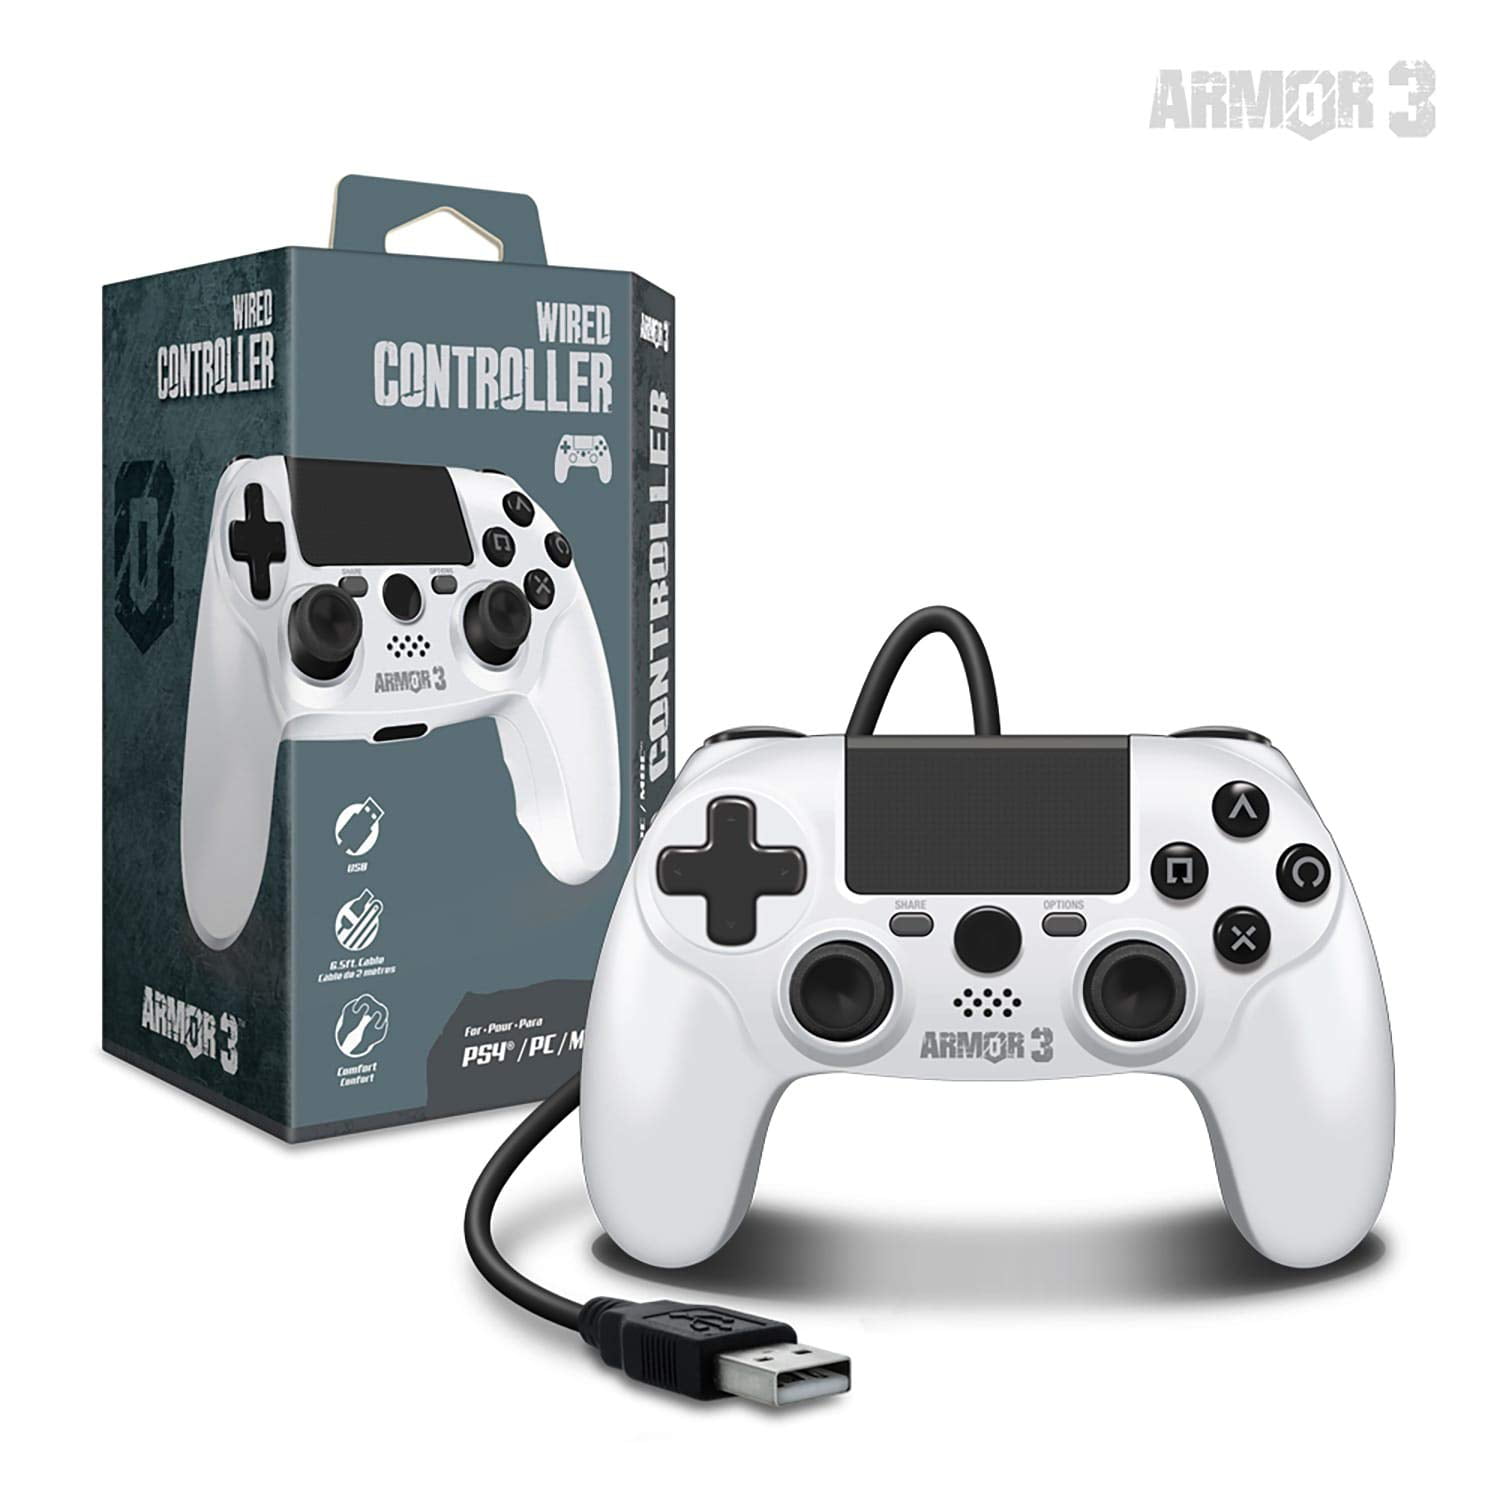 Armor3 Wired Game Controller For Ps4 Pc Mac Playstation 4 White Walmart Com Walmart Com